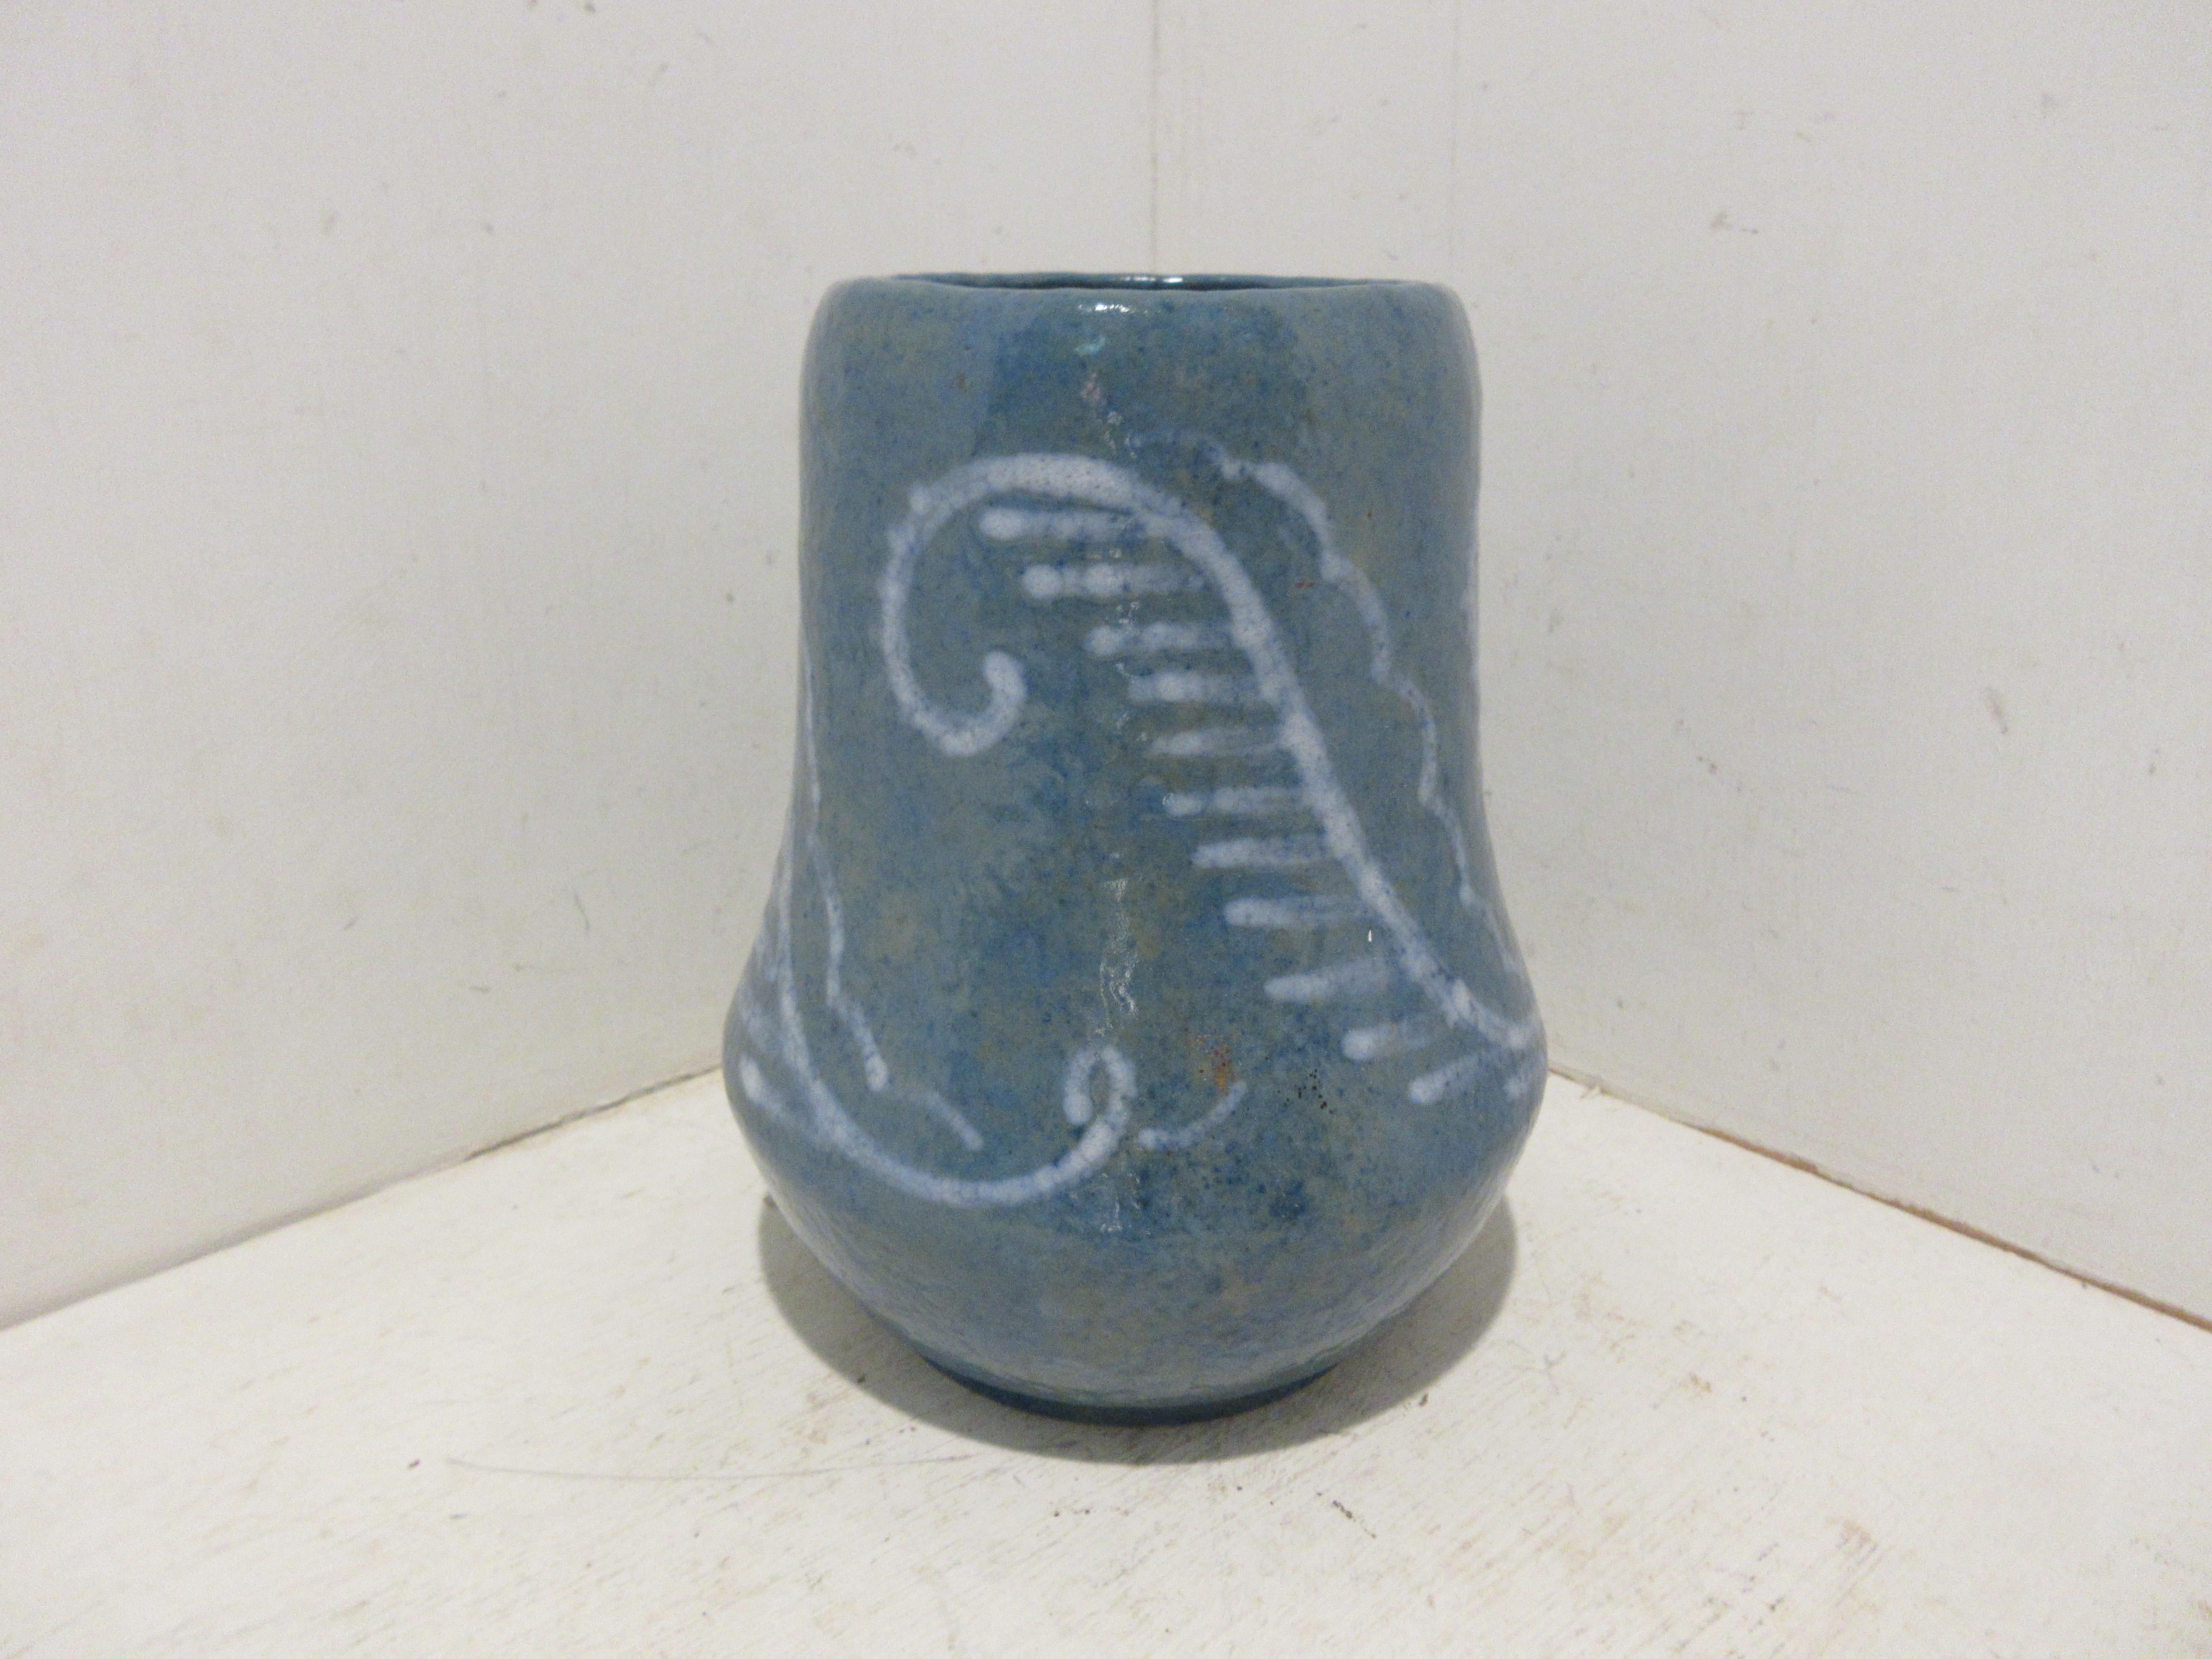 This is a handmade, 1 off Sgraffito vase made by the Swedish ceramic artist Josef Ekberg in 1907. He was one of Sweden’s top ceramic artist at the time. He started working at the Gustavsberg foundry in 1898 till his death in 1945. His works are